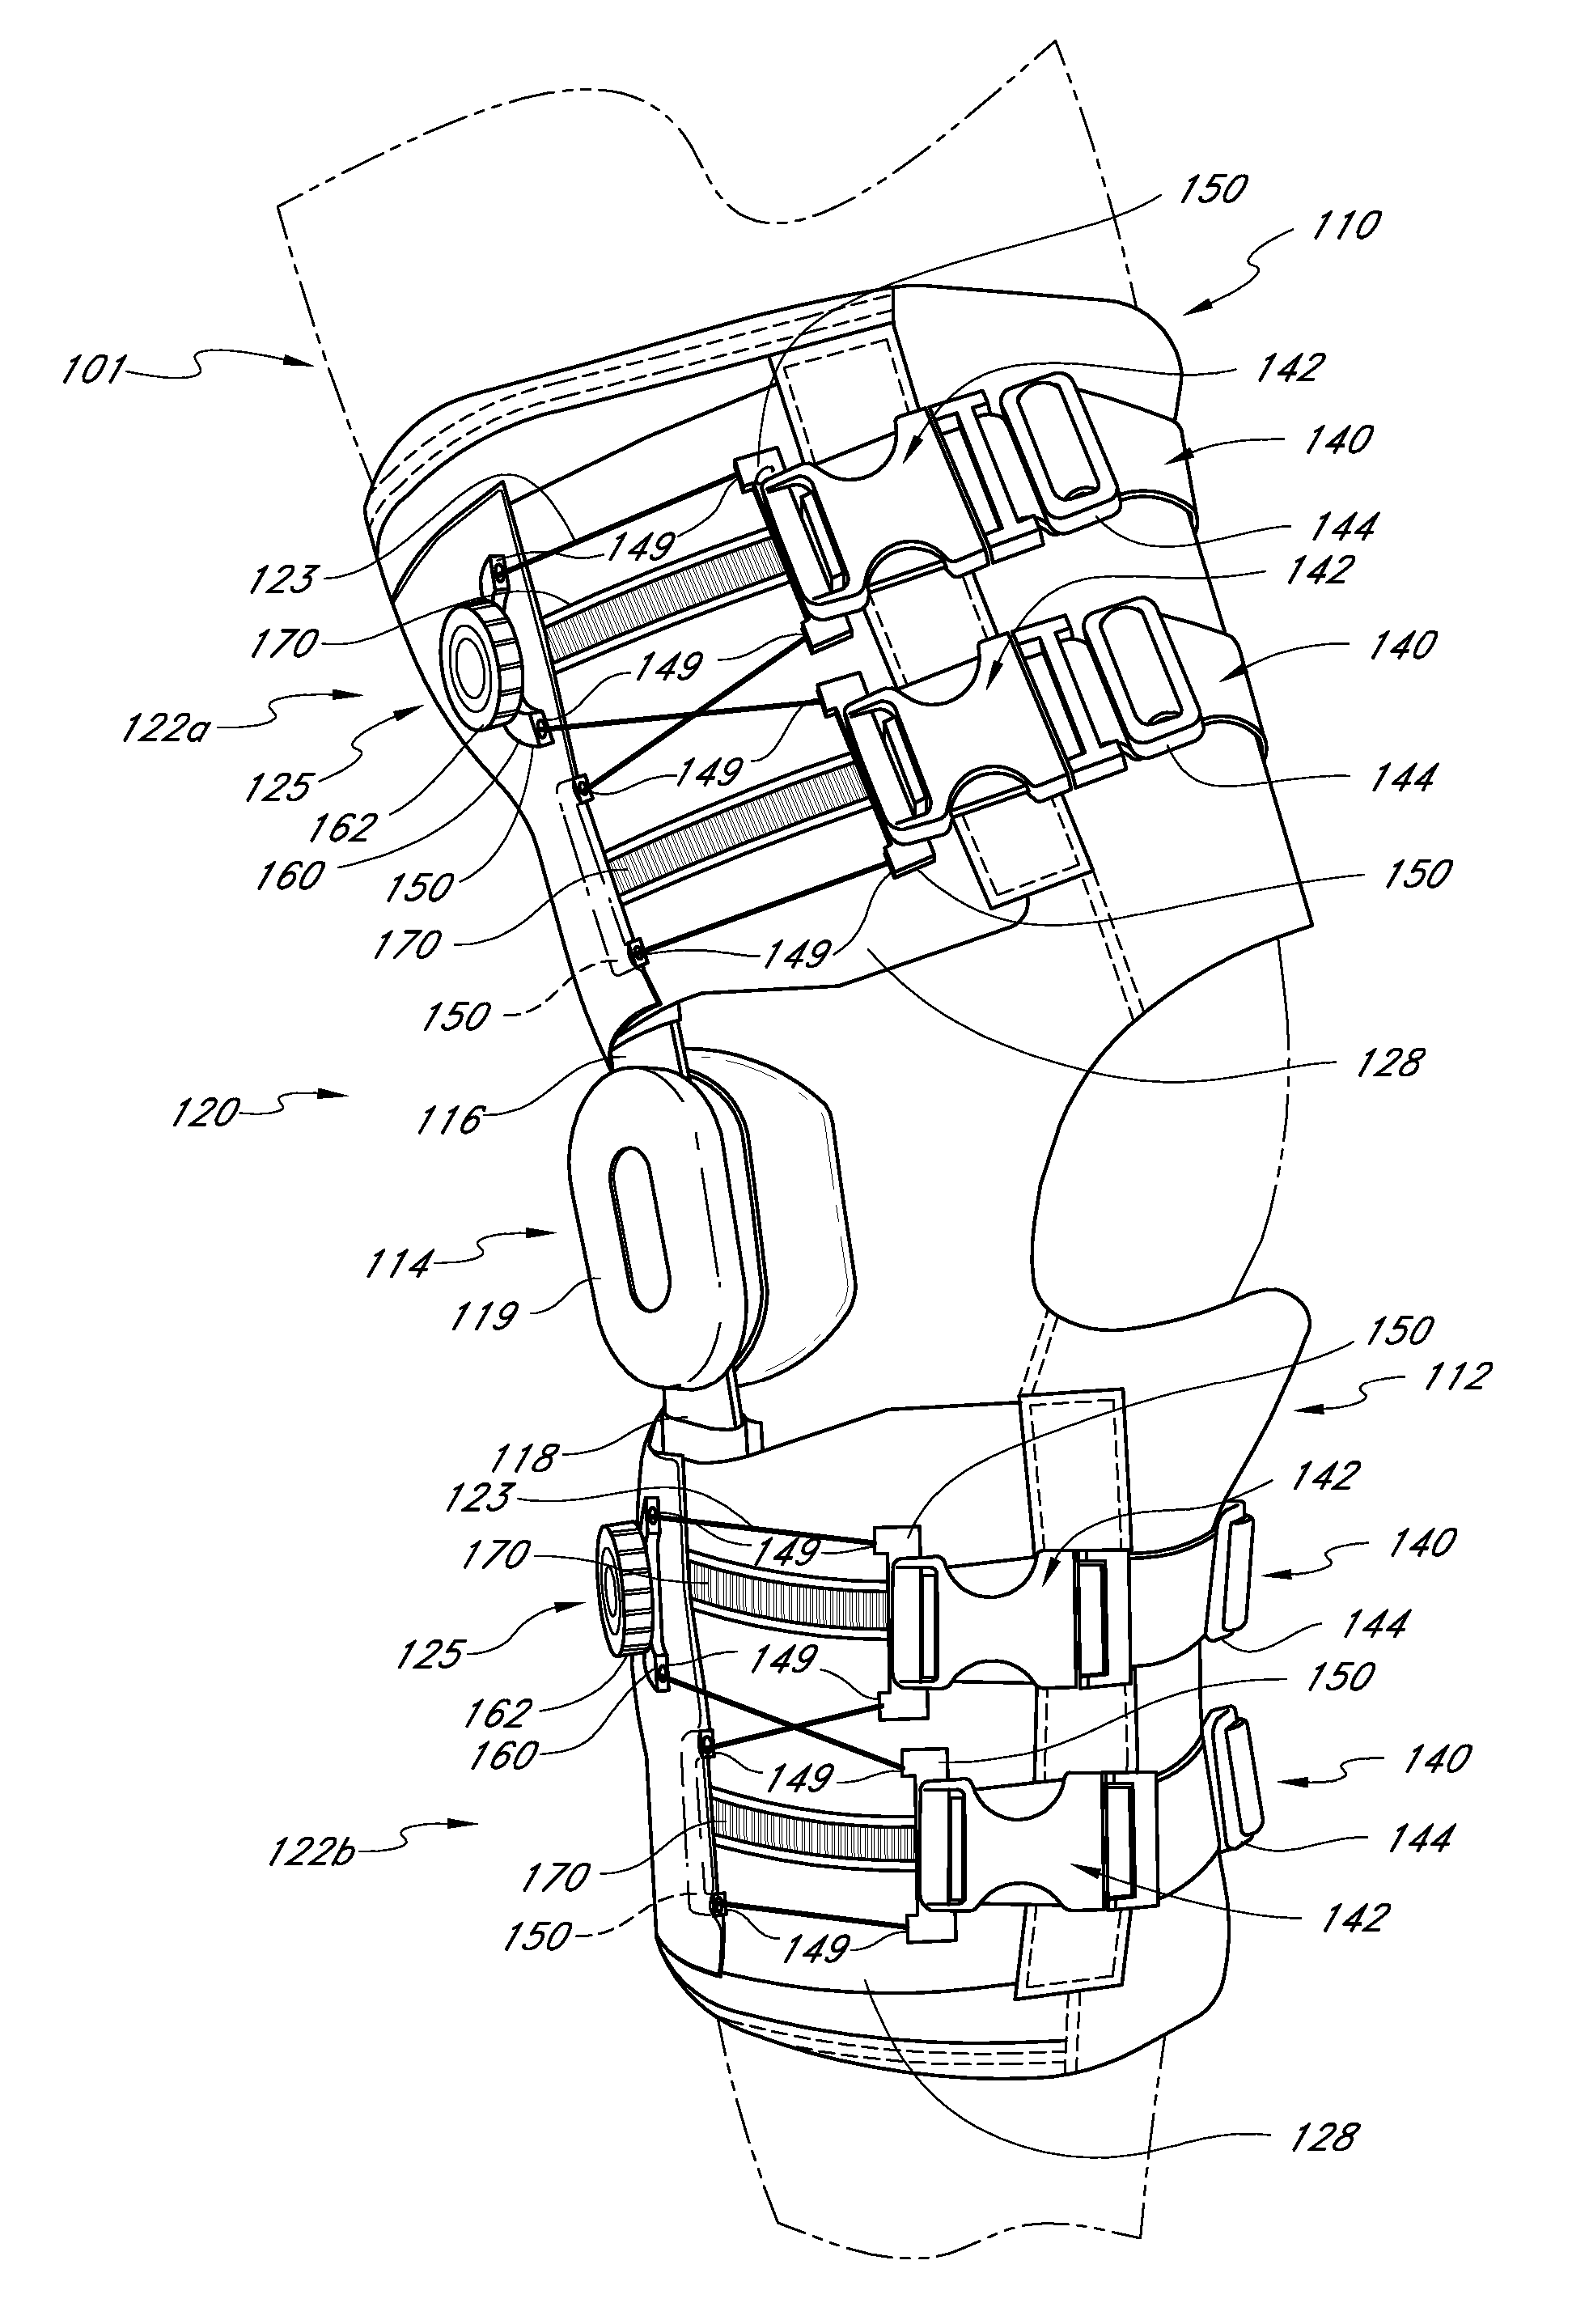 Closure system for braces, protective wear and similar articles